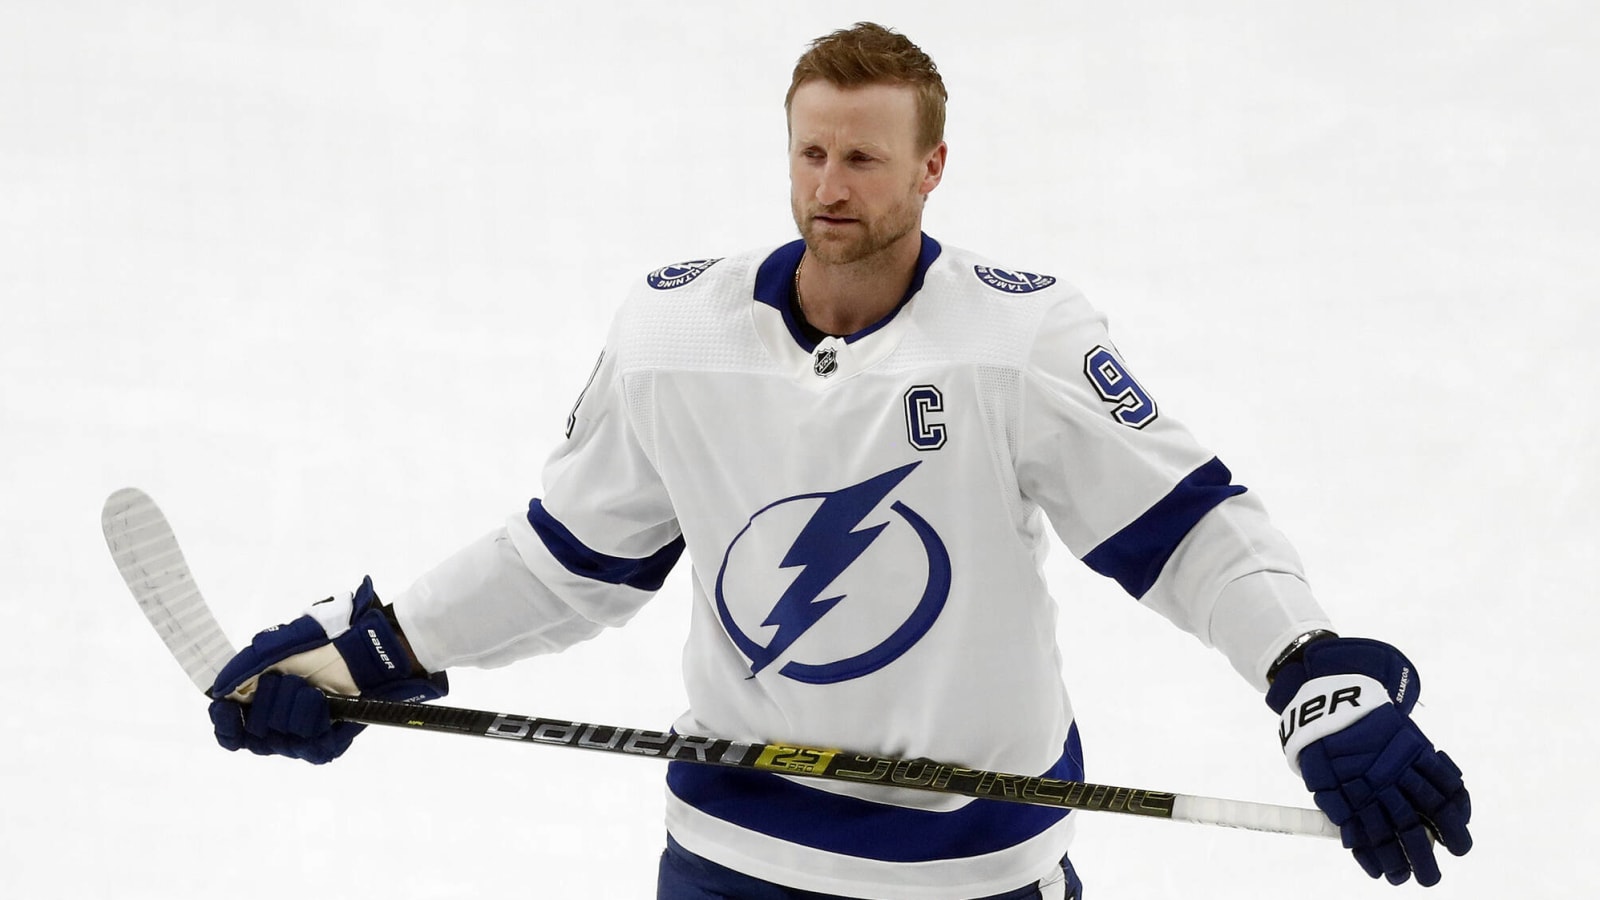 Steven Stamkos file: 'Montreal is the most logical team if he leaves Tampa'.